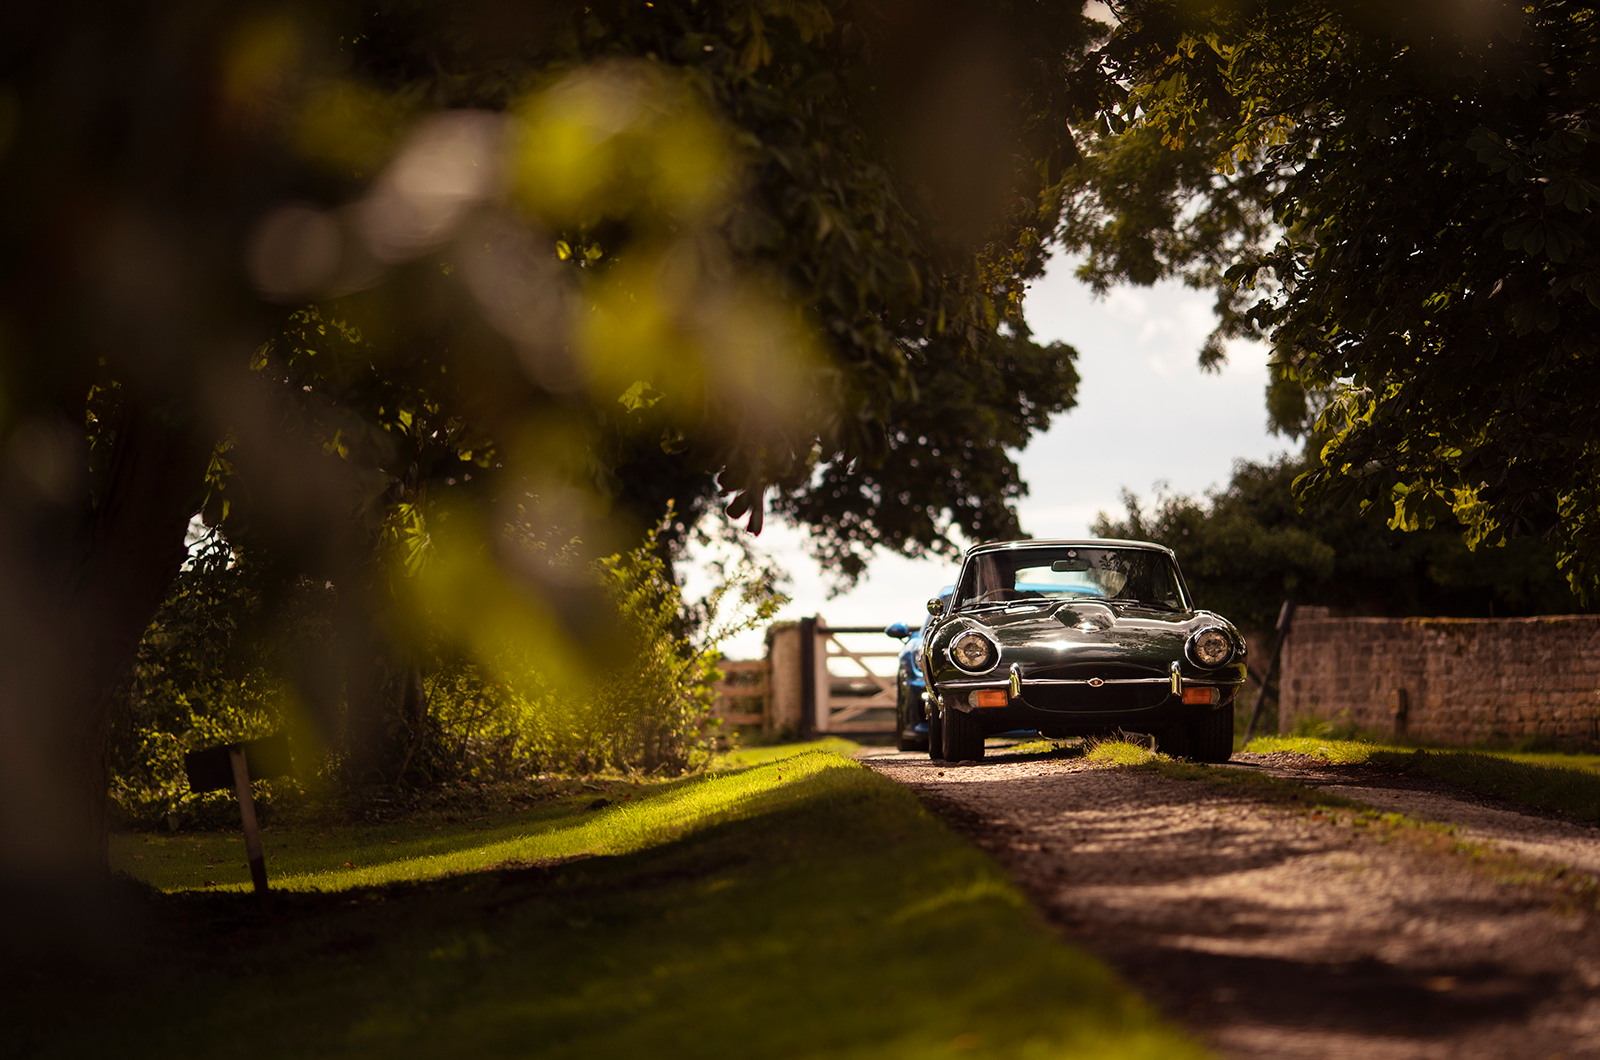 Classic & Sports Car – Want to get out in your classic? Check out this new tour